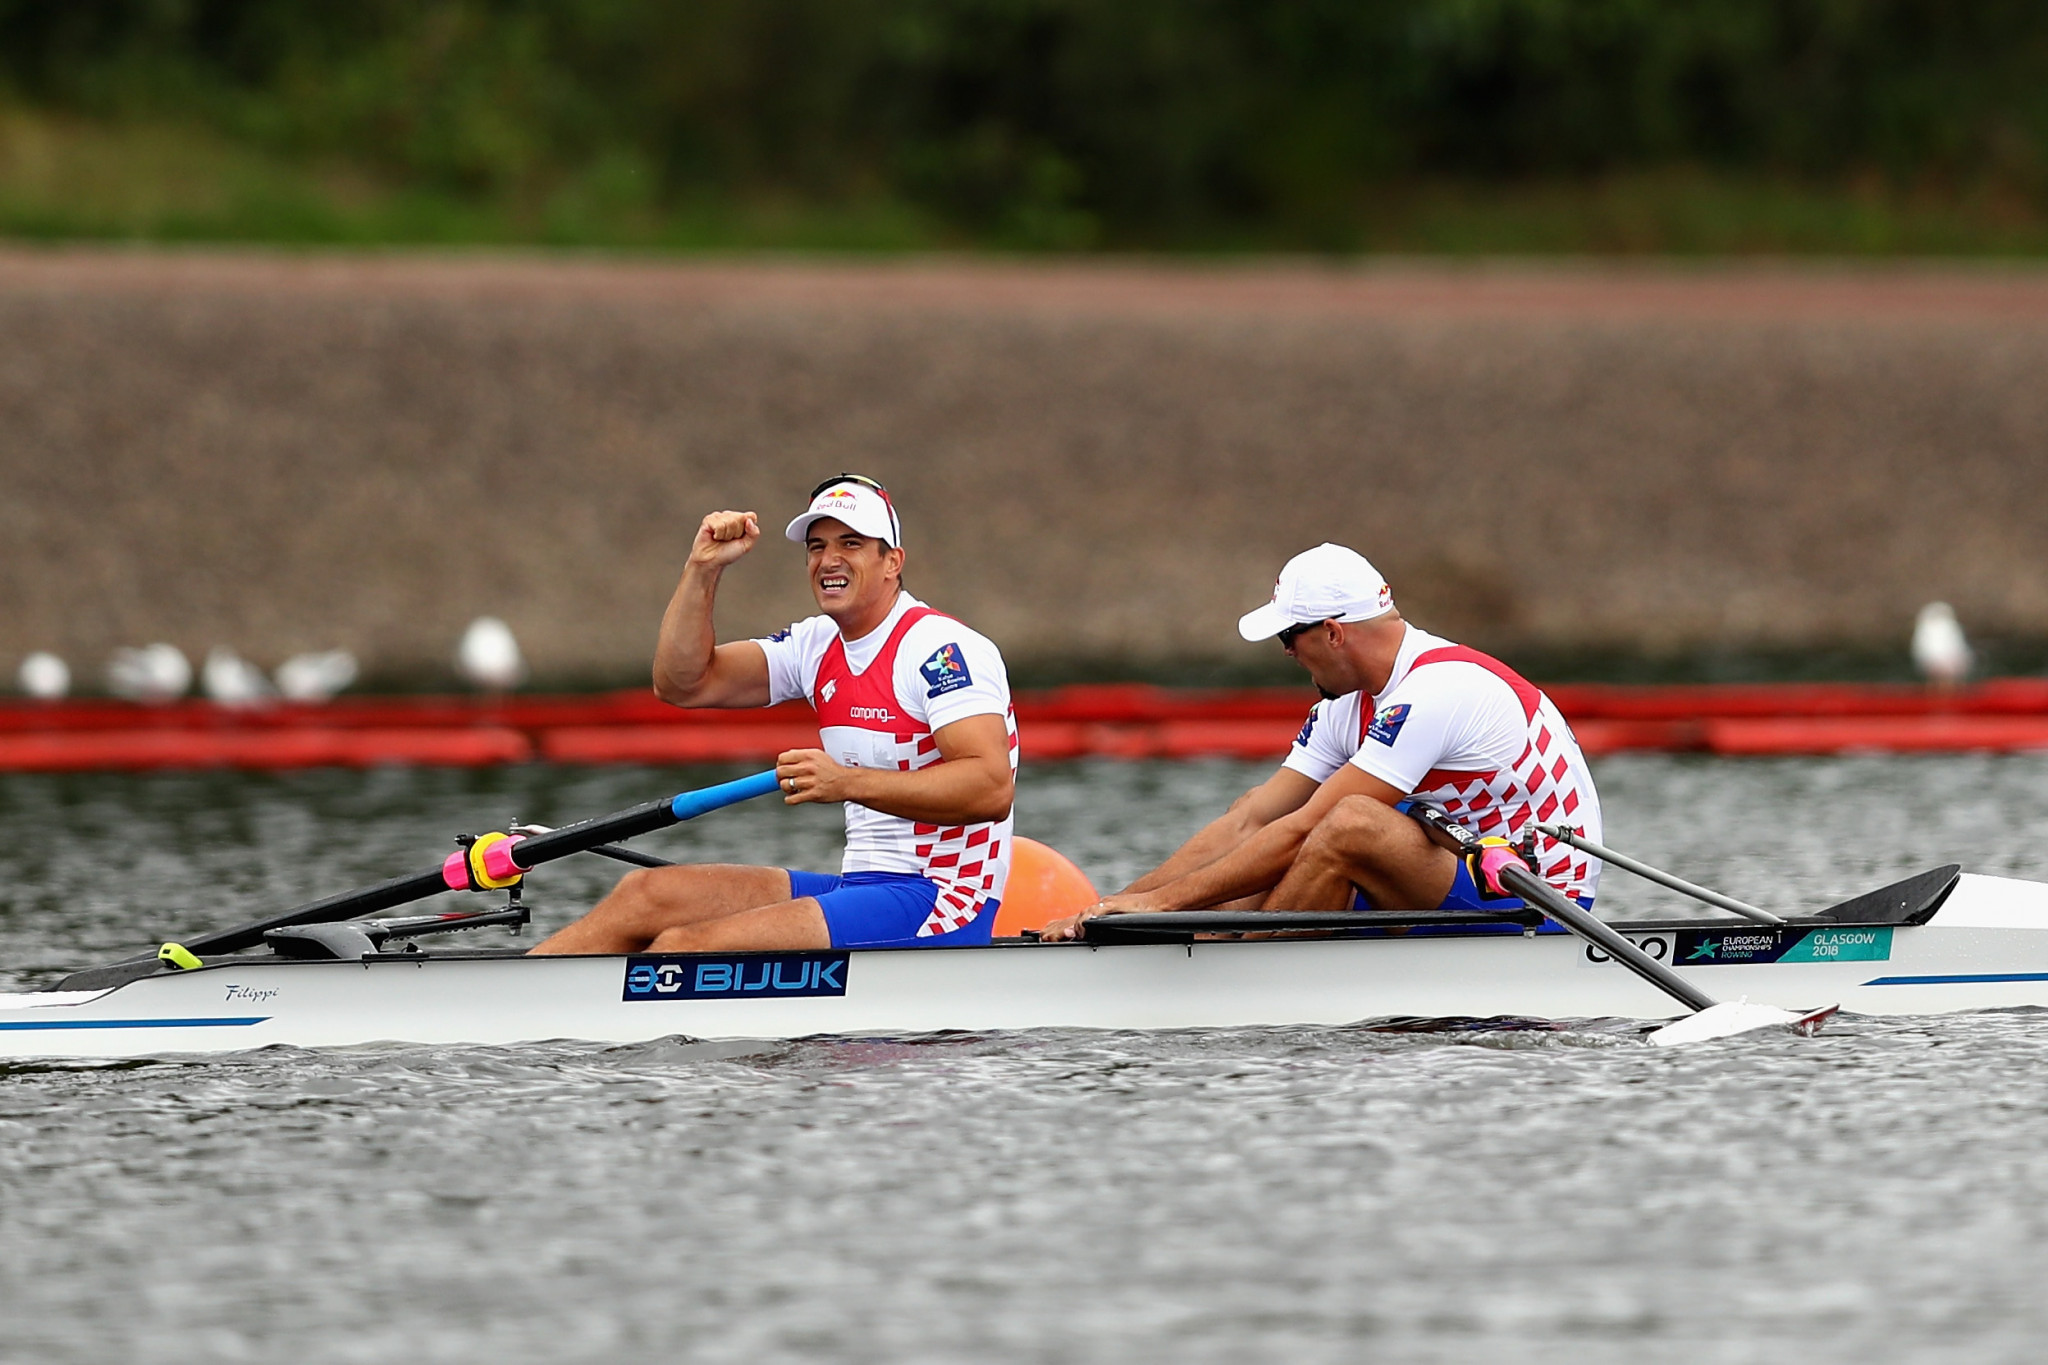 Croatiia's Sinković brothers will return this weekend to the course at Plovdiiv where they won the men's pair world title last year ©Getty Images